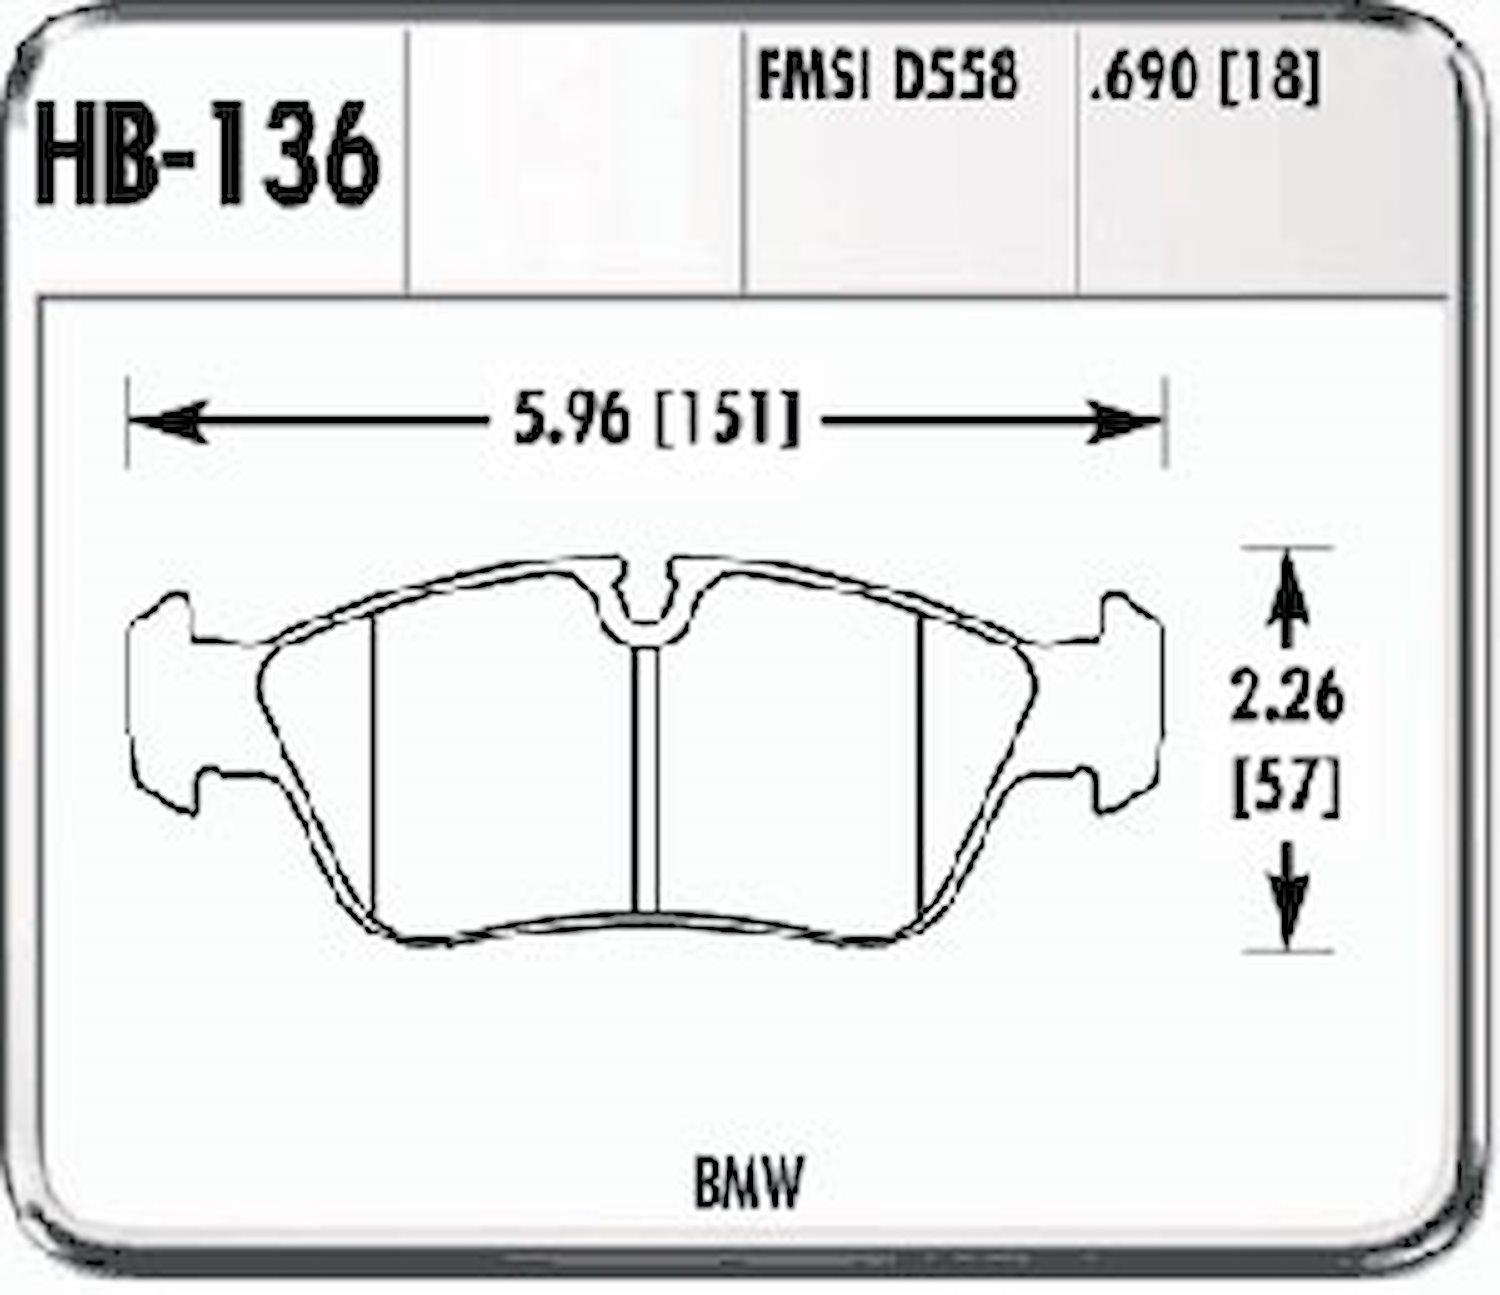 Hawk High Performance Front Brake Pads Fits: 11/91-98